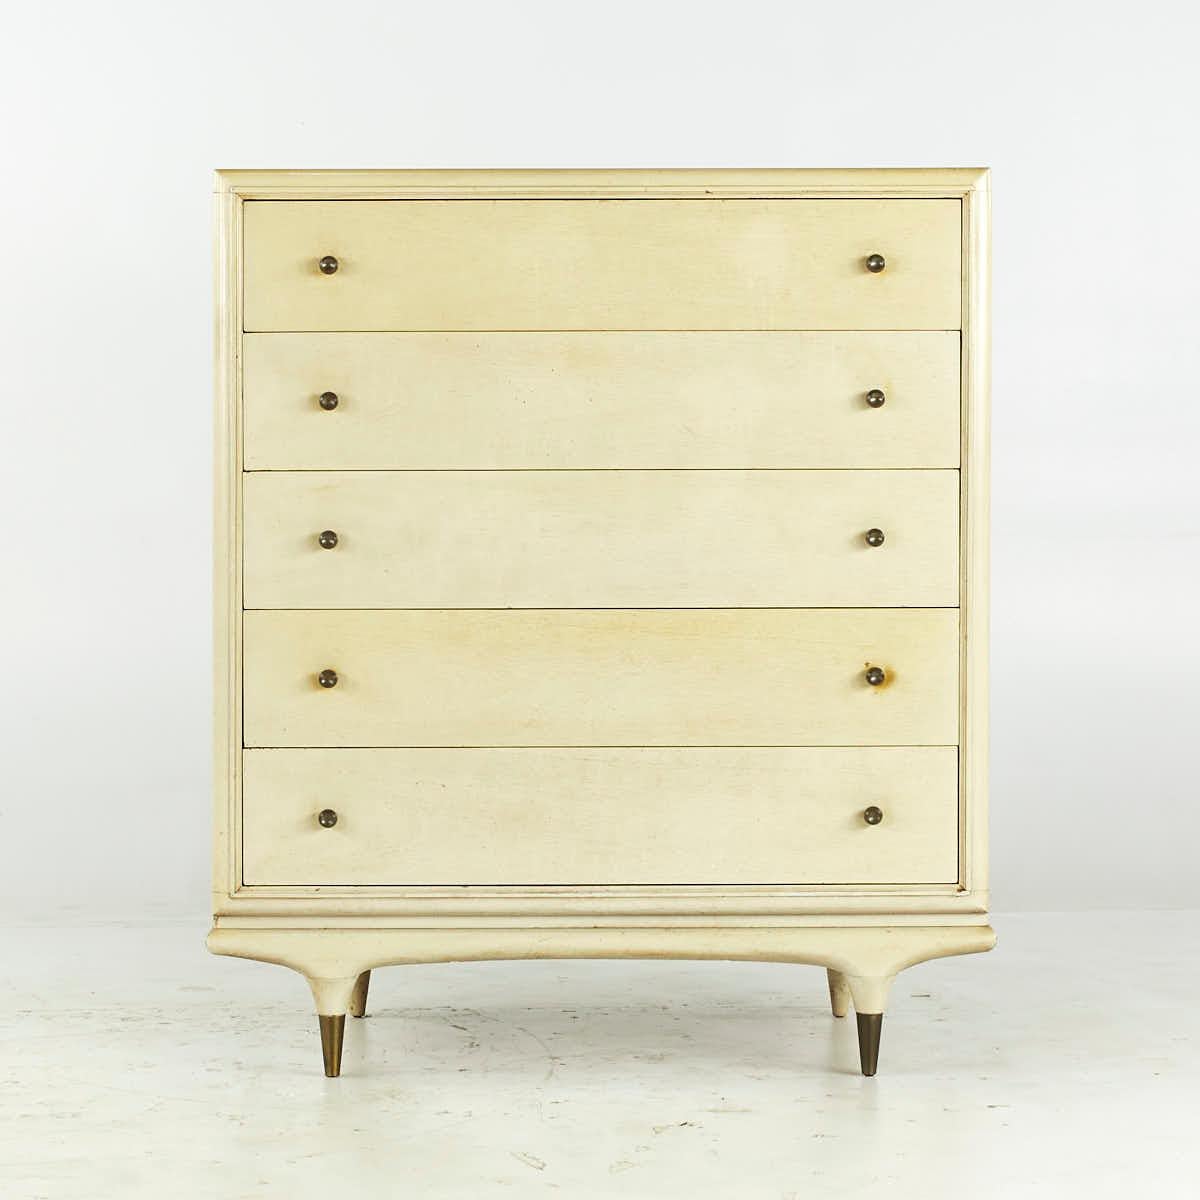 Kent Coffey Mid Century Continental Highboy Dresser

This highboy measures: 40 wide x 21 deep x 47 inches high

All pieces of furniture can be had in what we call restored vintage condition. That means the piece is restored upon purchase so it’s